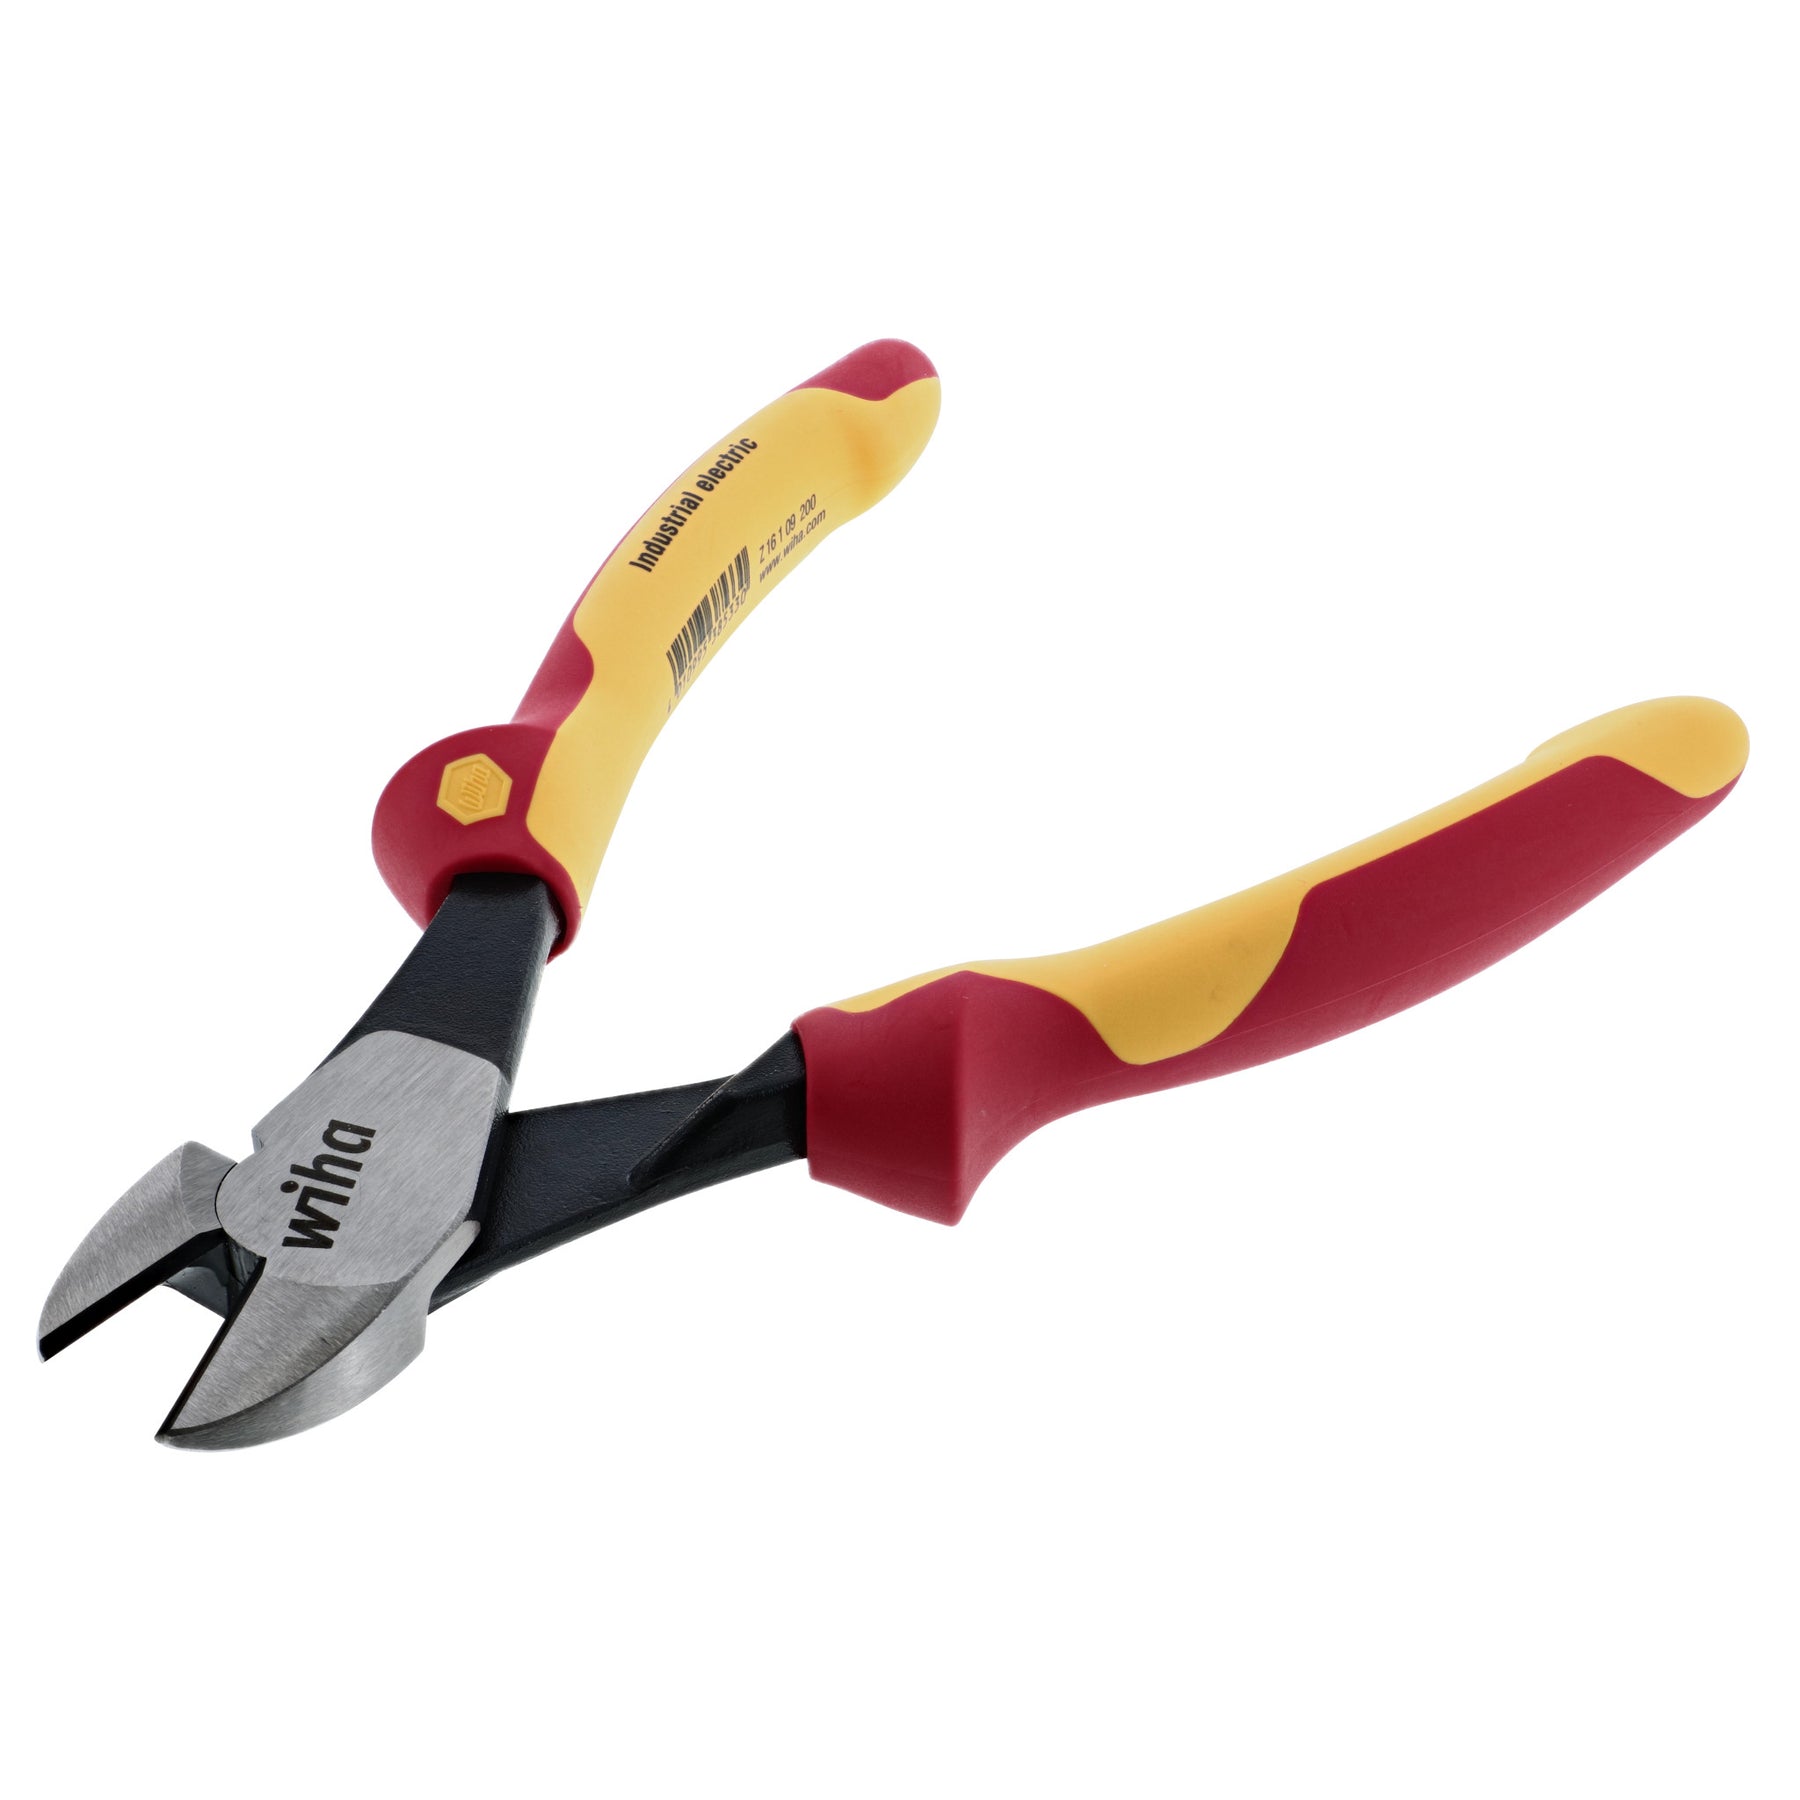 Insulated Industrial High Leverage Diagonal Cutters 8.0"